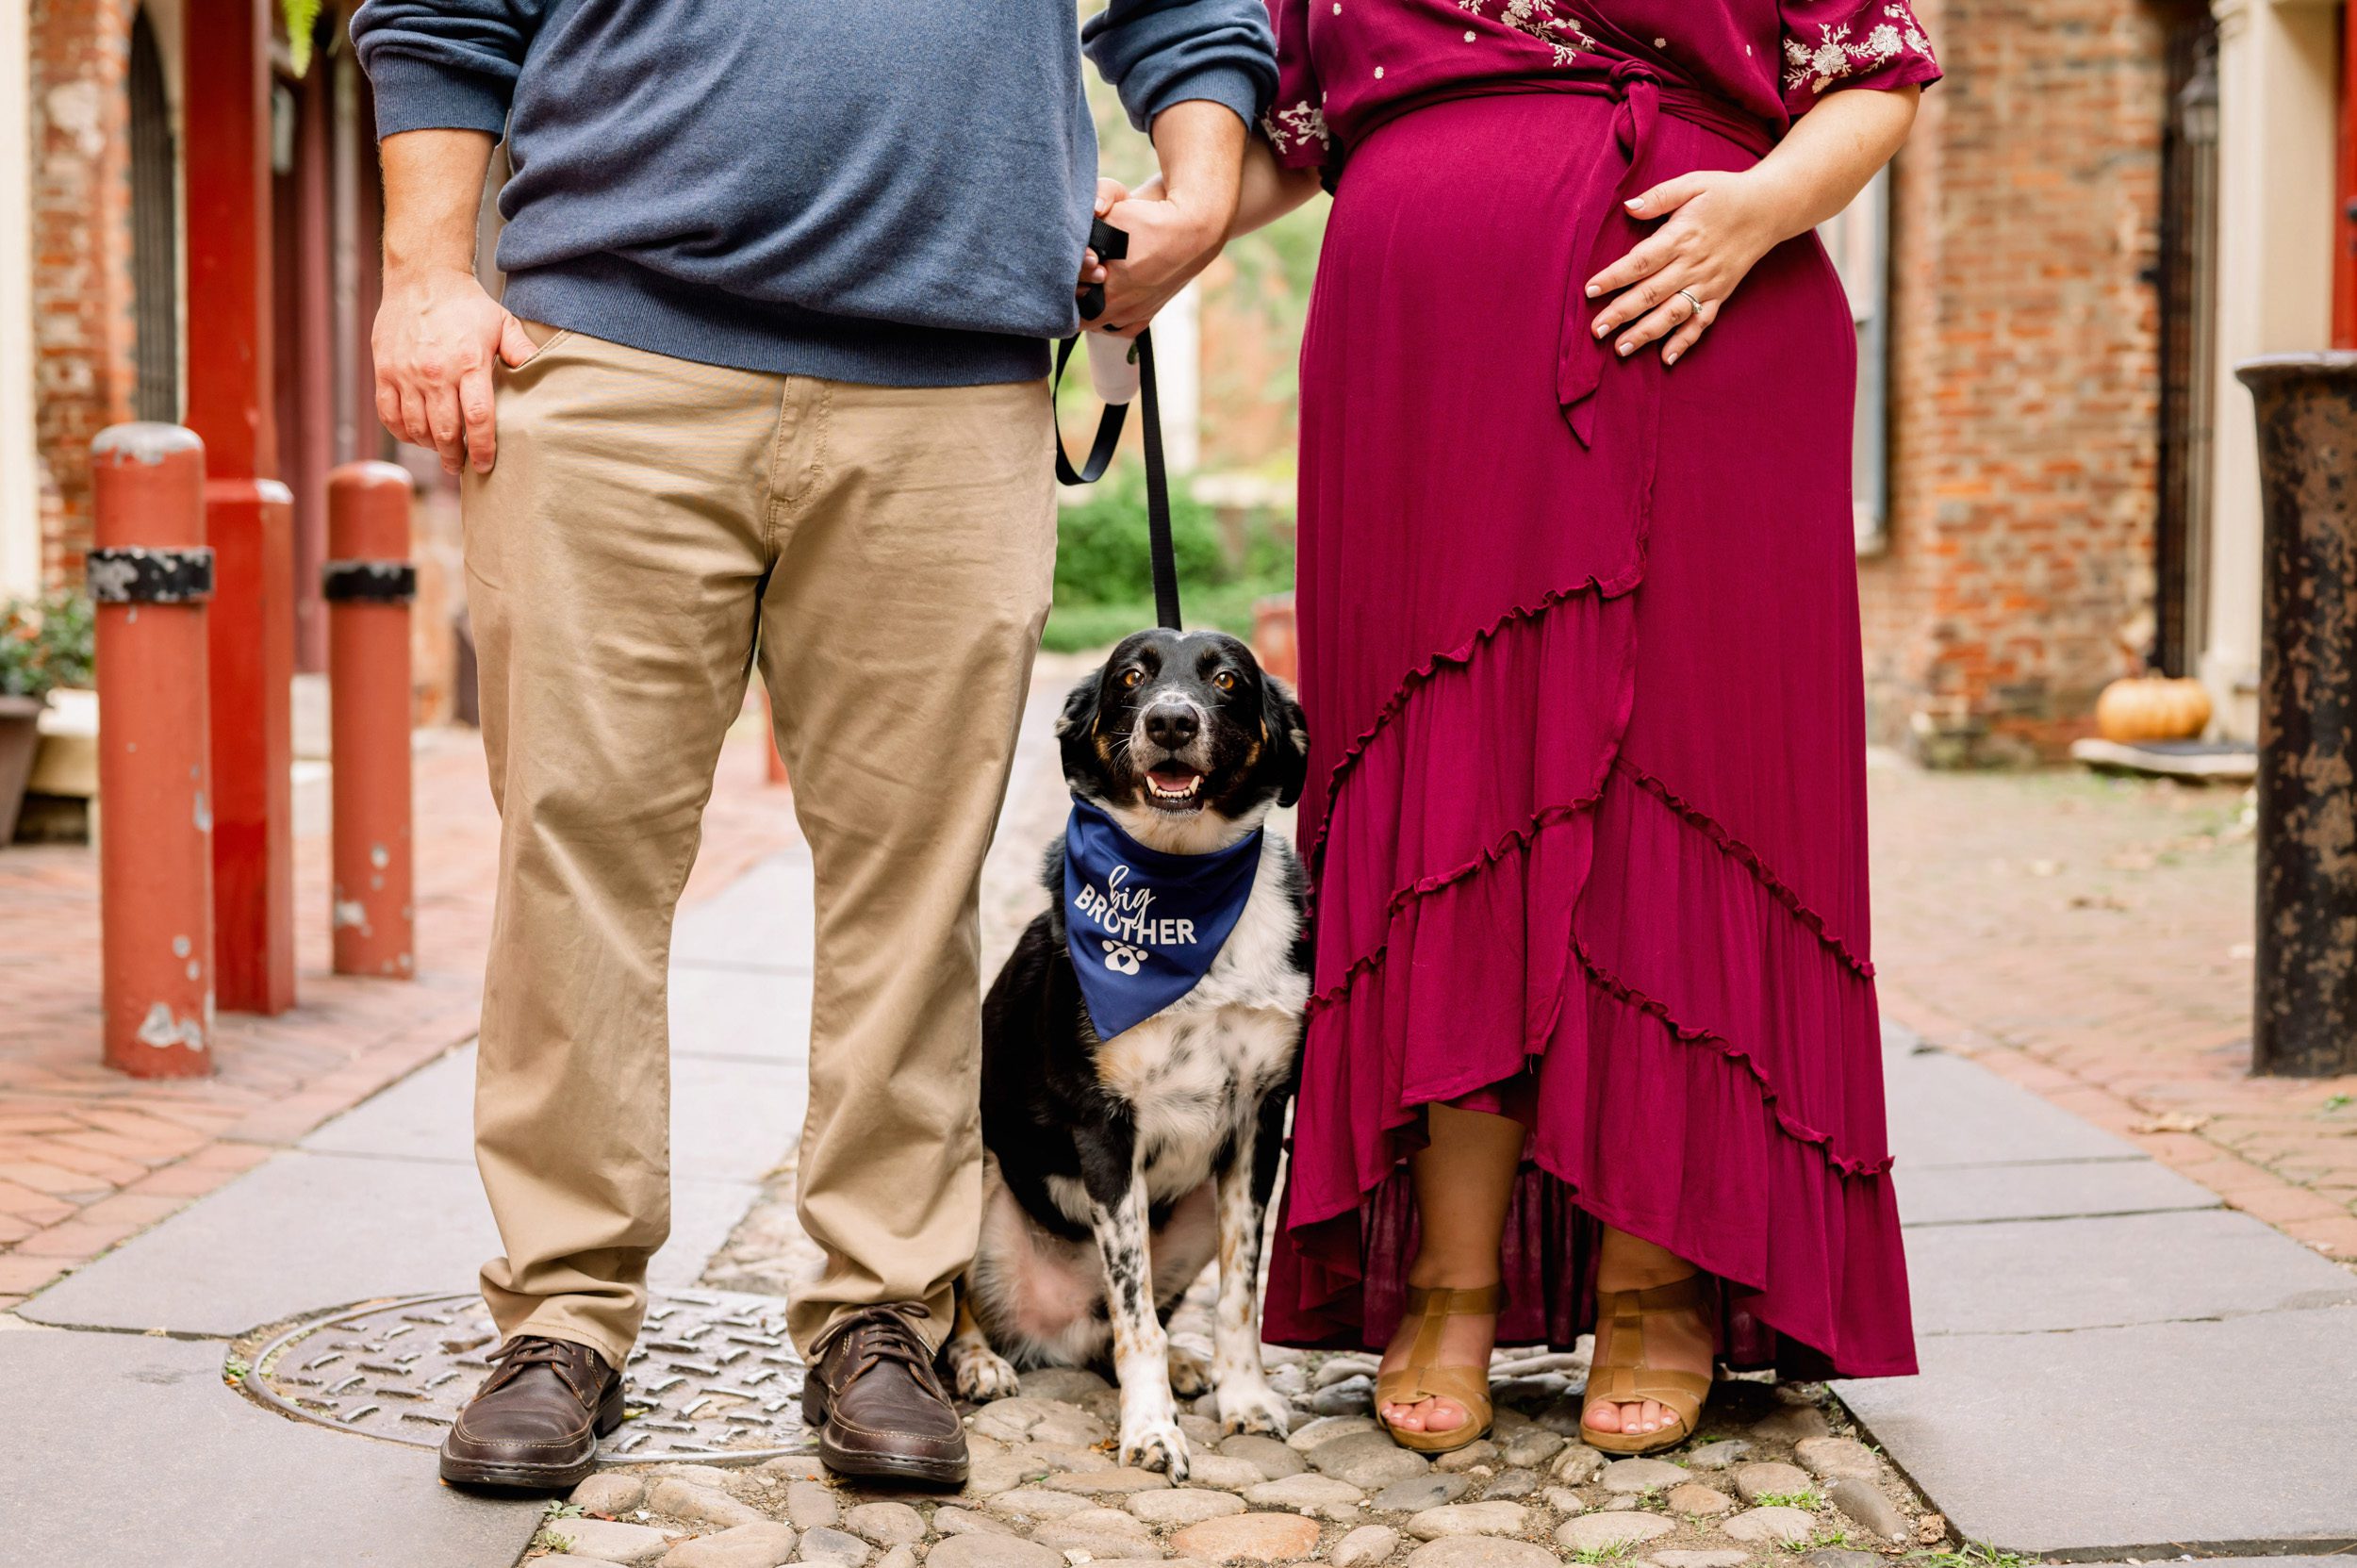 Close up picture of a dog wearing a blue "Big Brother" handkerchief around his neck standing in between expecting parents holding hands at a maternity photo session